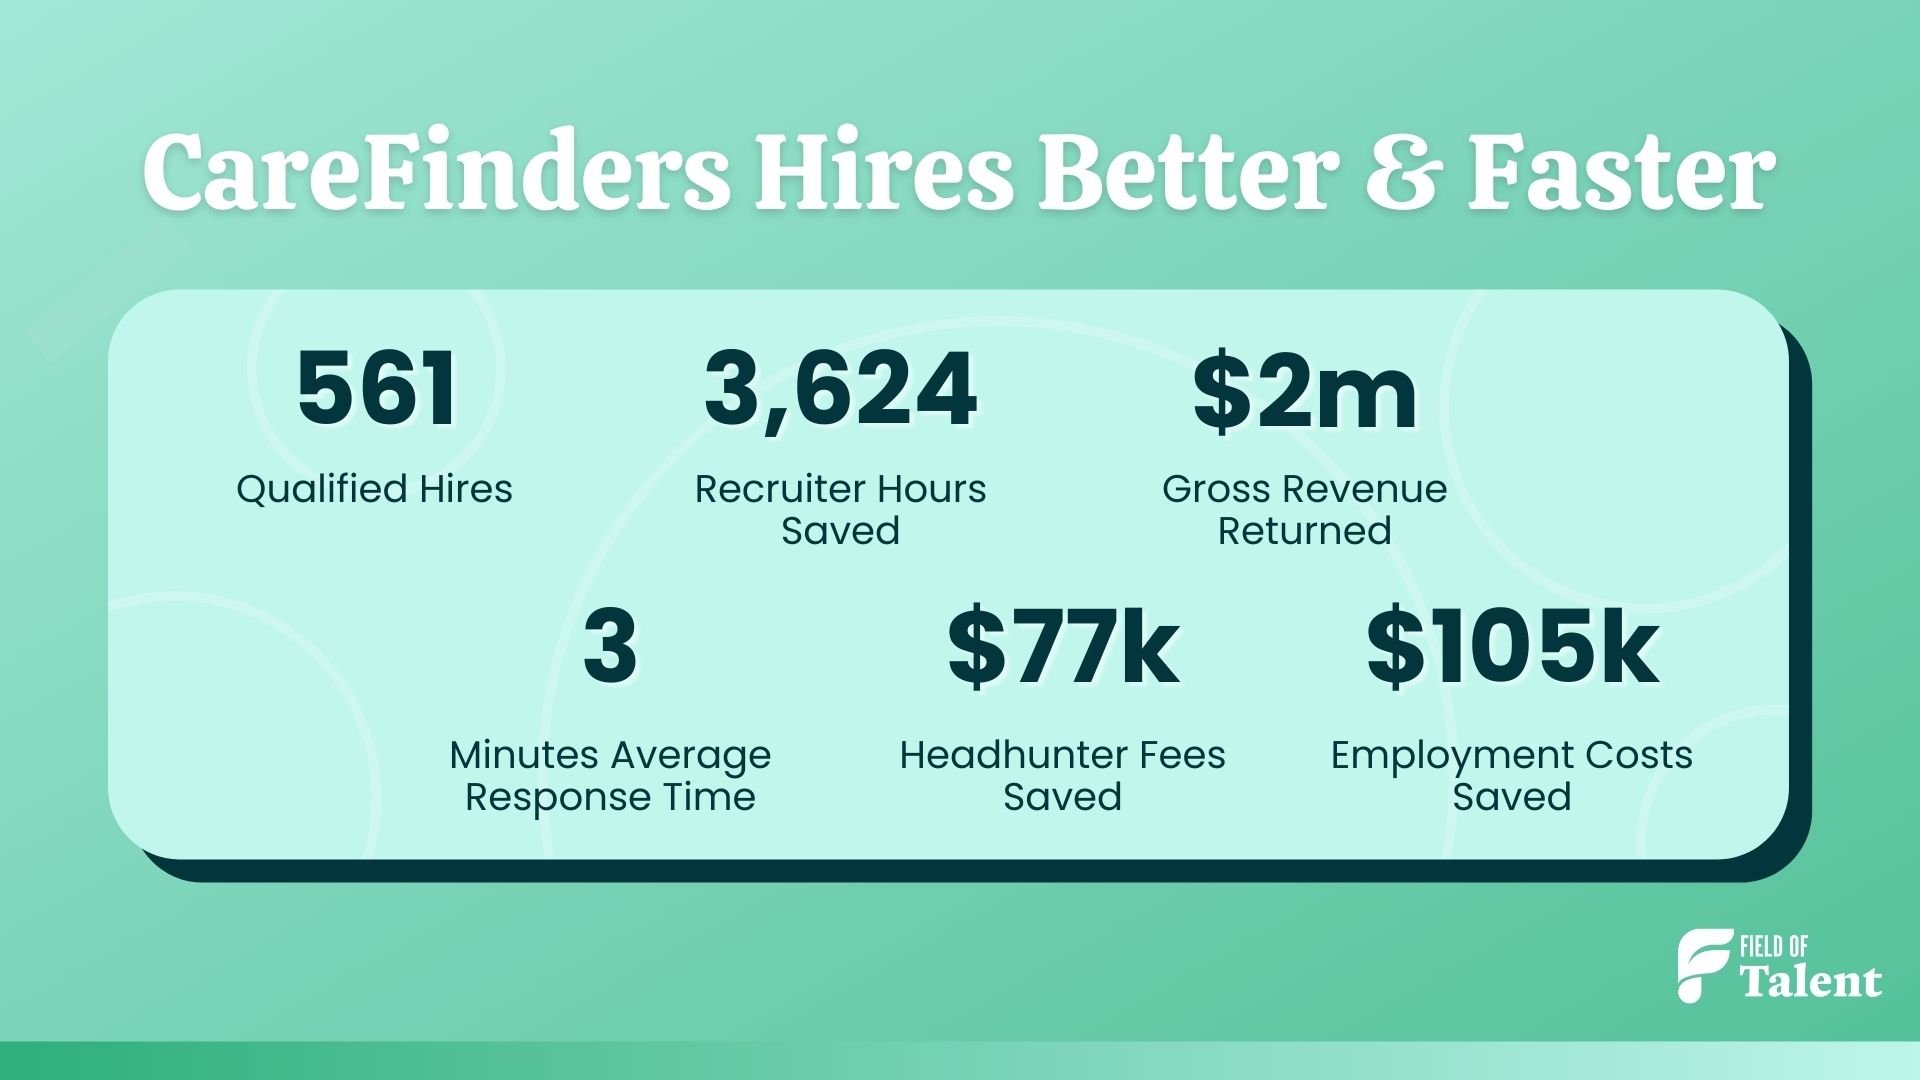 CareFinders hires better and faster case study